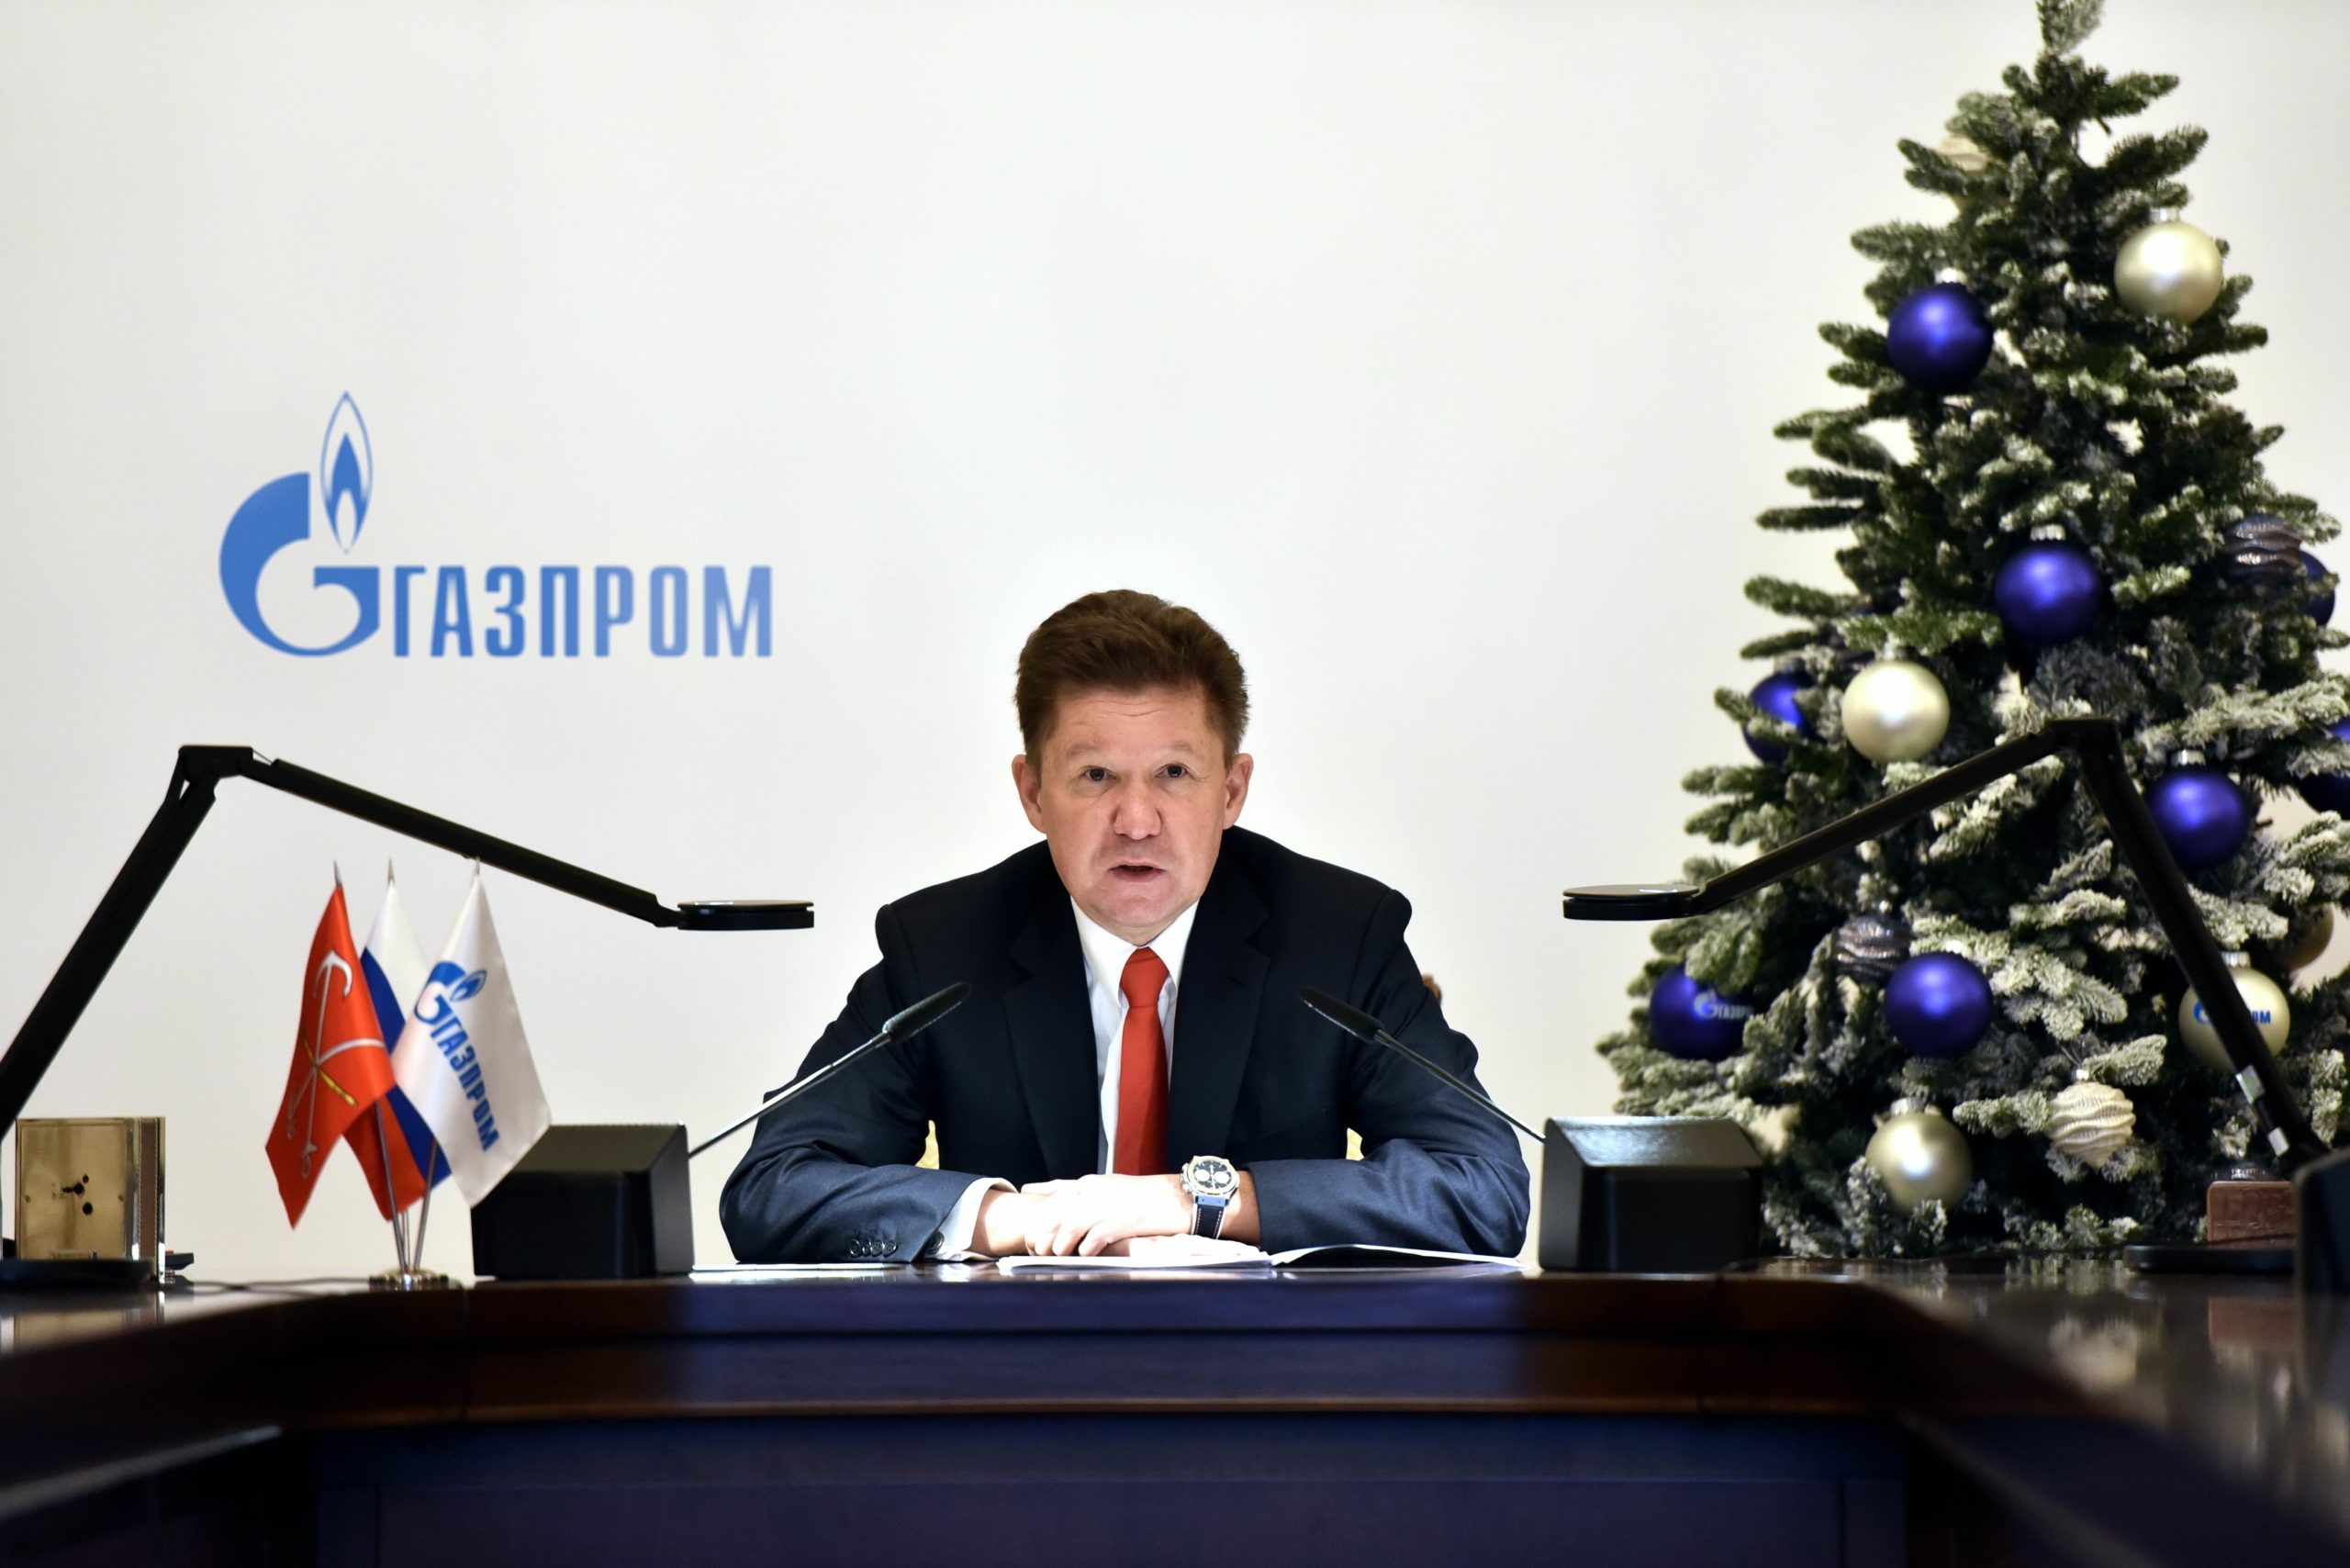 Speech by Alexey Miller at conference call on occasion of New Year’s Eve